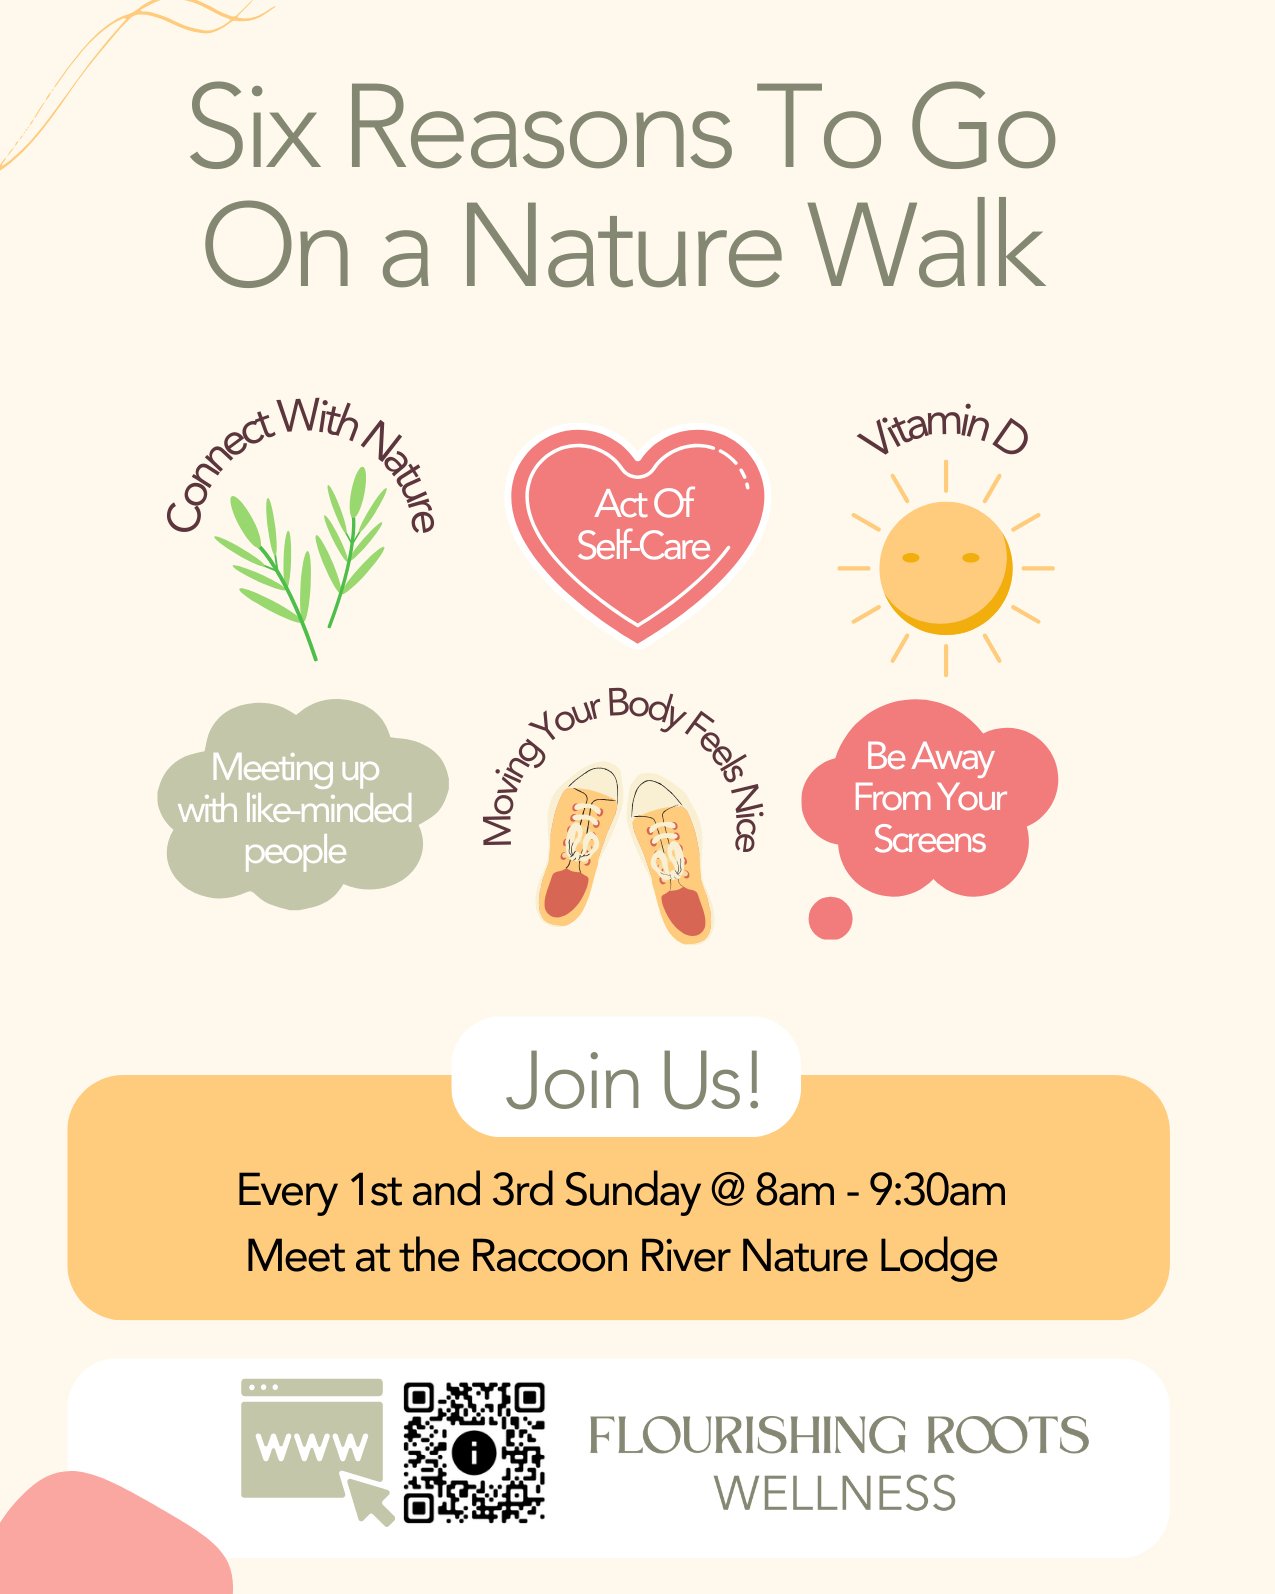 Come as you are for a Flourishing Roots Wellness community nature hike! Let&rsquo;s get some morning sun into our eyes while we walk at a slow pace taking in our surroundings. The trail is paved at Raccoon River so wear comfy shoes and dress in appro